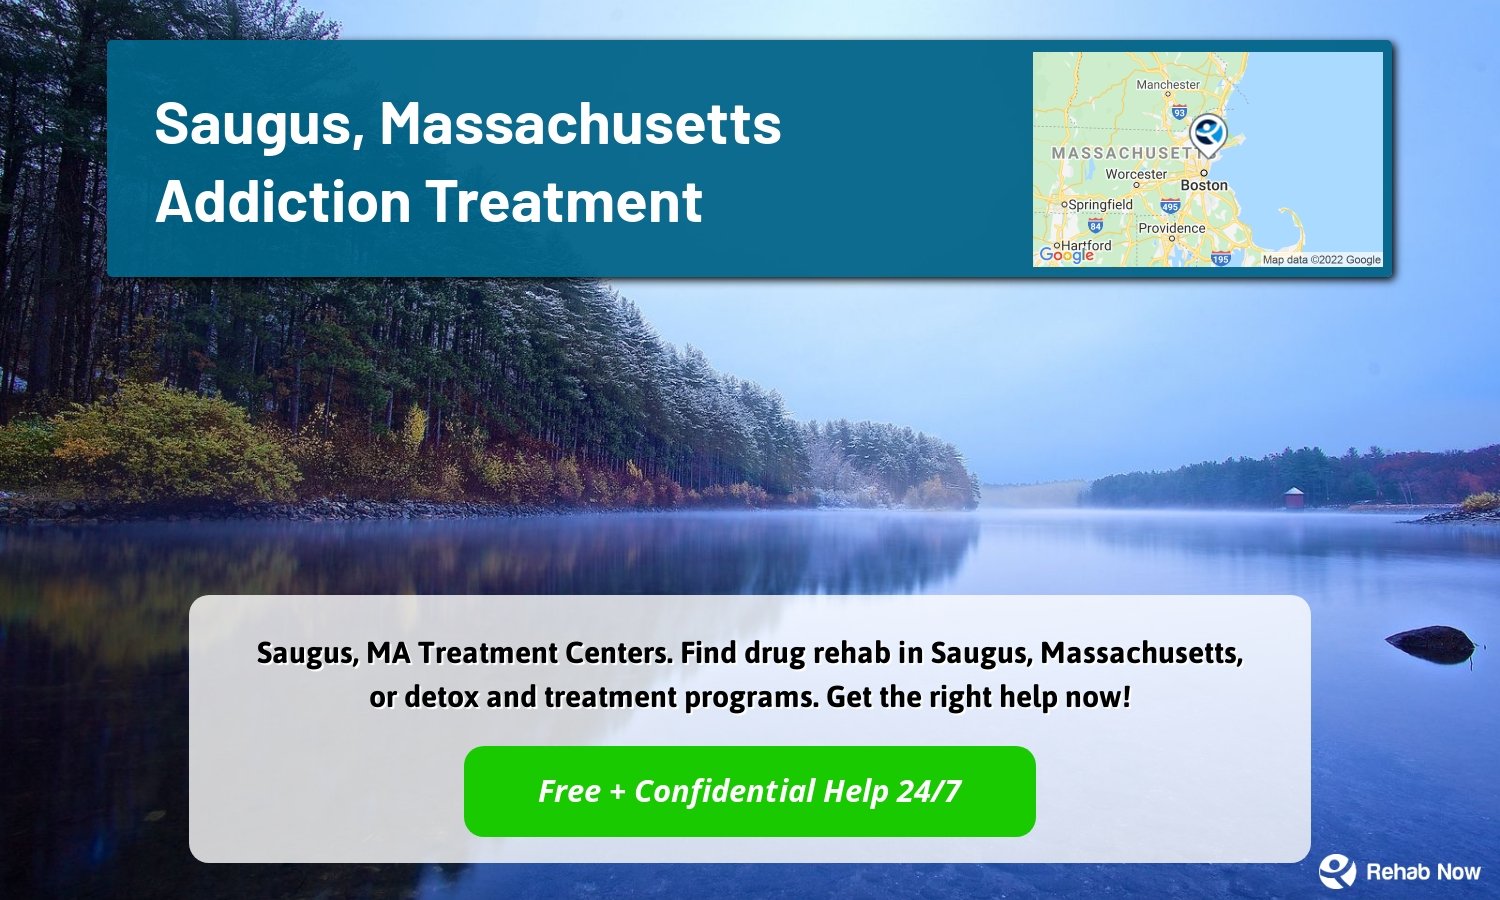 Saugus, MA Treatment Centers. Find drug rehab in Saugus, Massachusetts, or detox and treatment programs. Get the right help now!